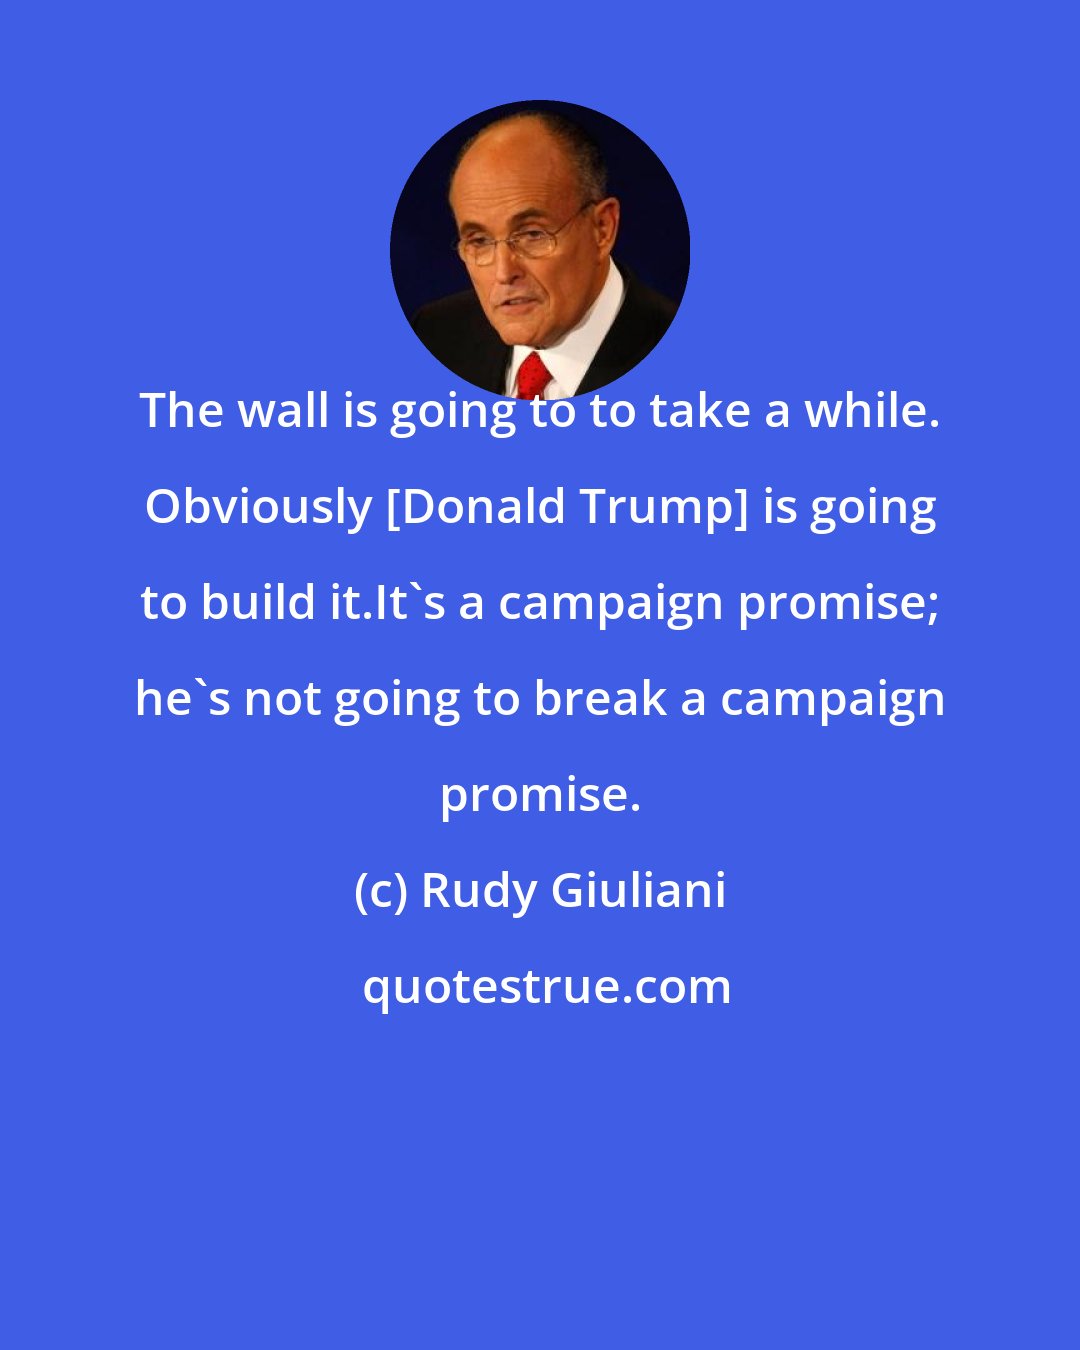 Rudy Giuliani: The wall is going to to take a while. Obviously [Donald Trump] is going to build it.It's a campaign promise; he's not going to break a campaign promise.